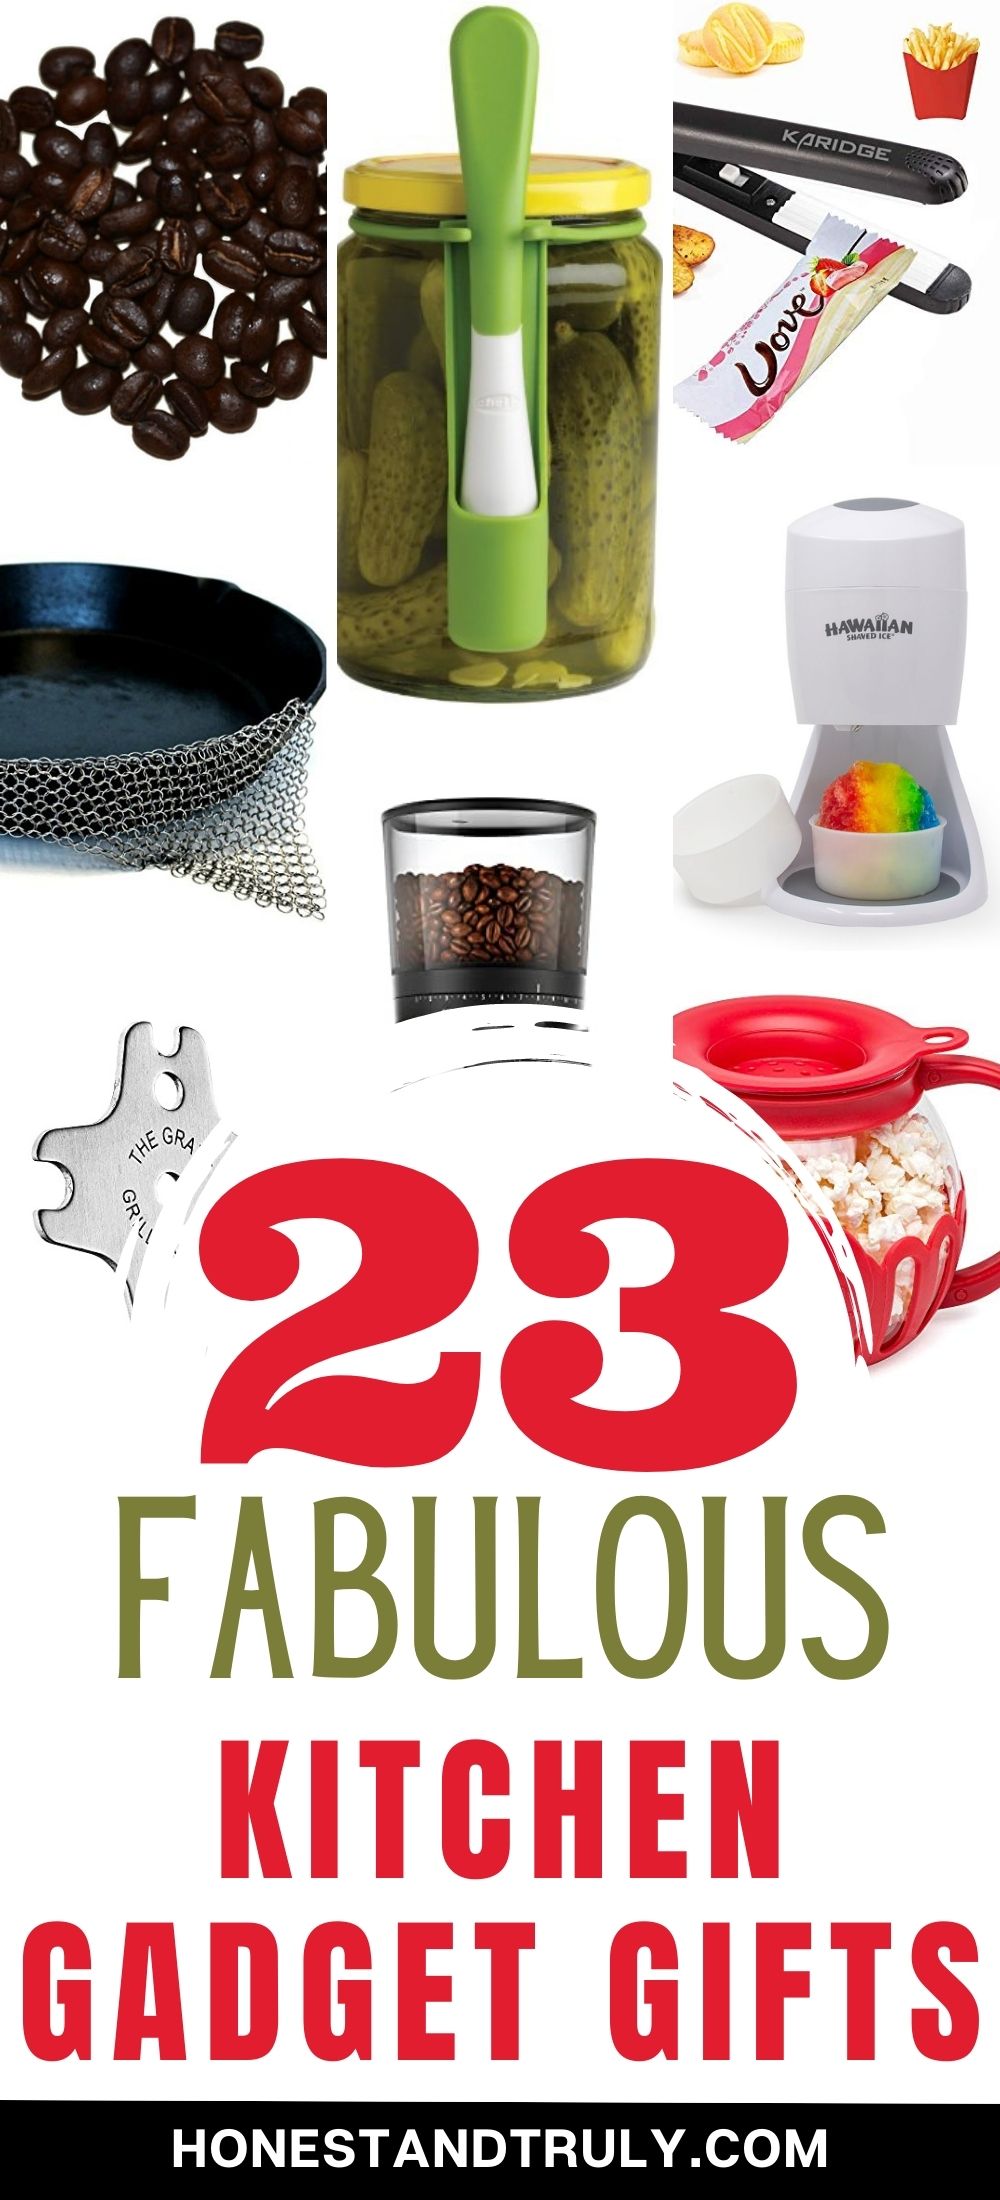 Home Gift Ideas for Everyone on your List - Maison de Pax